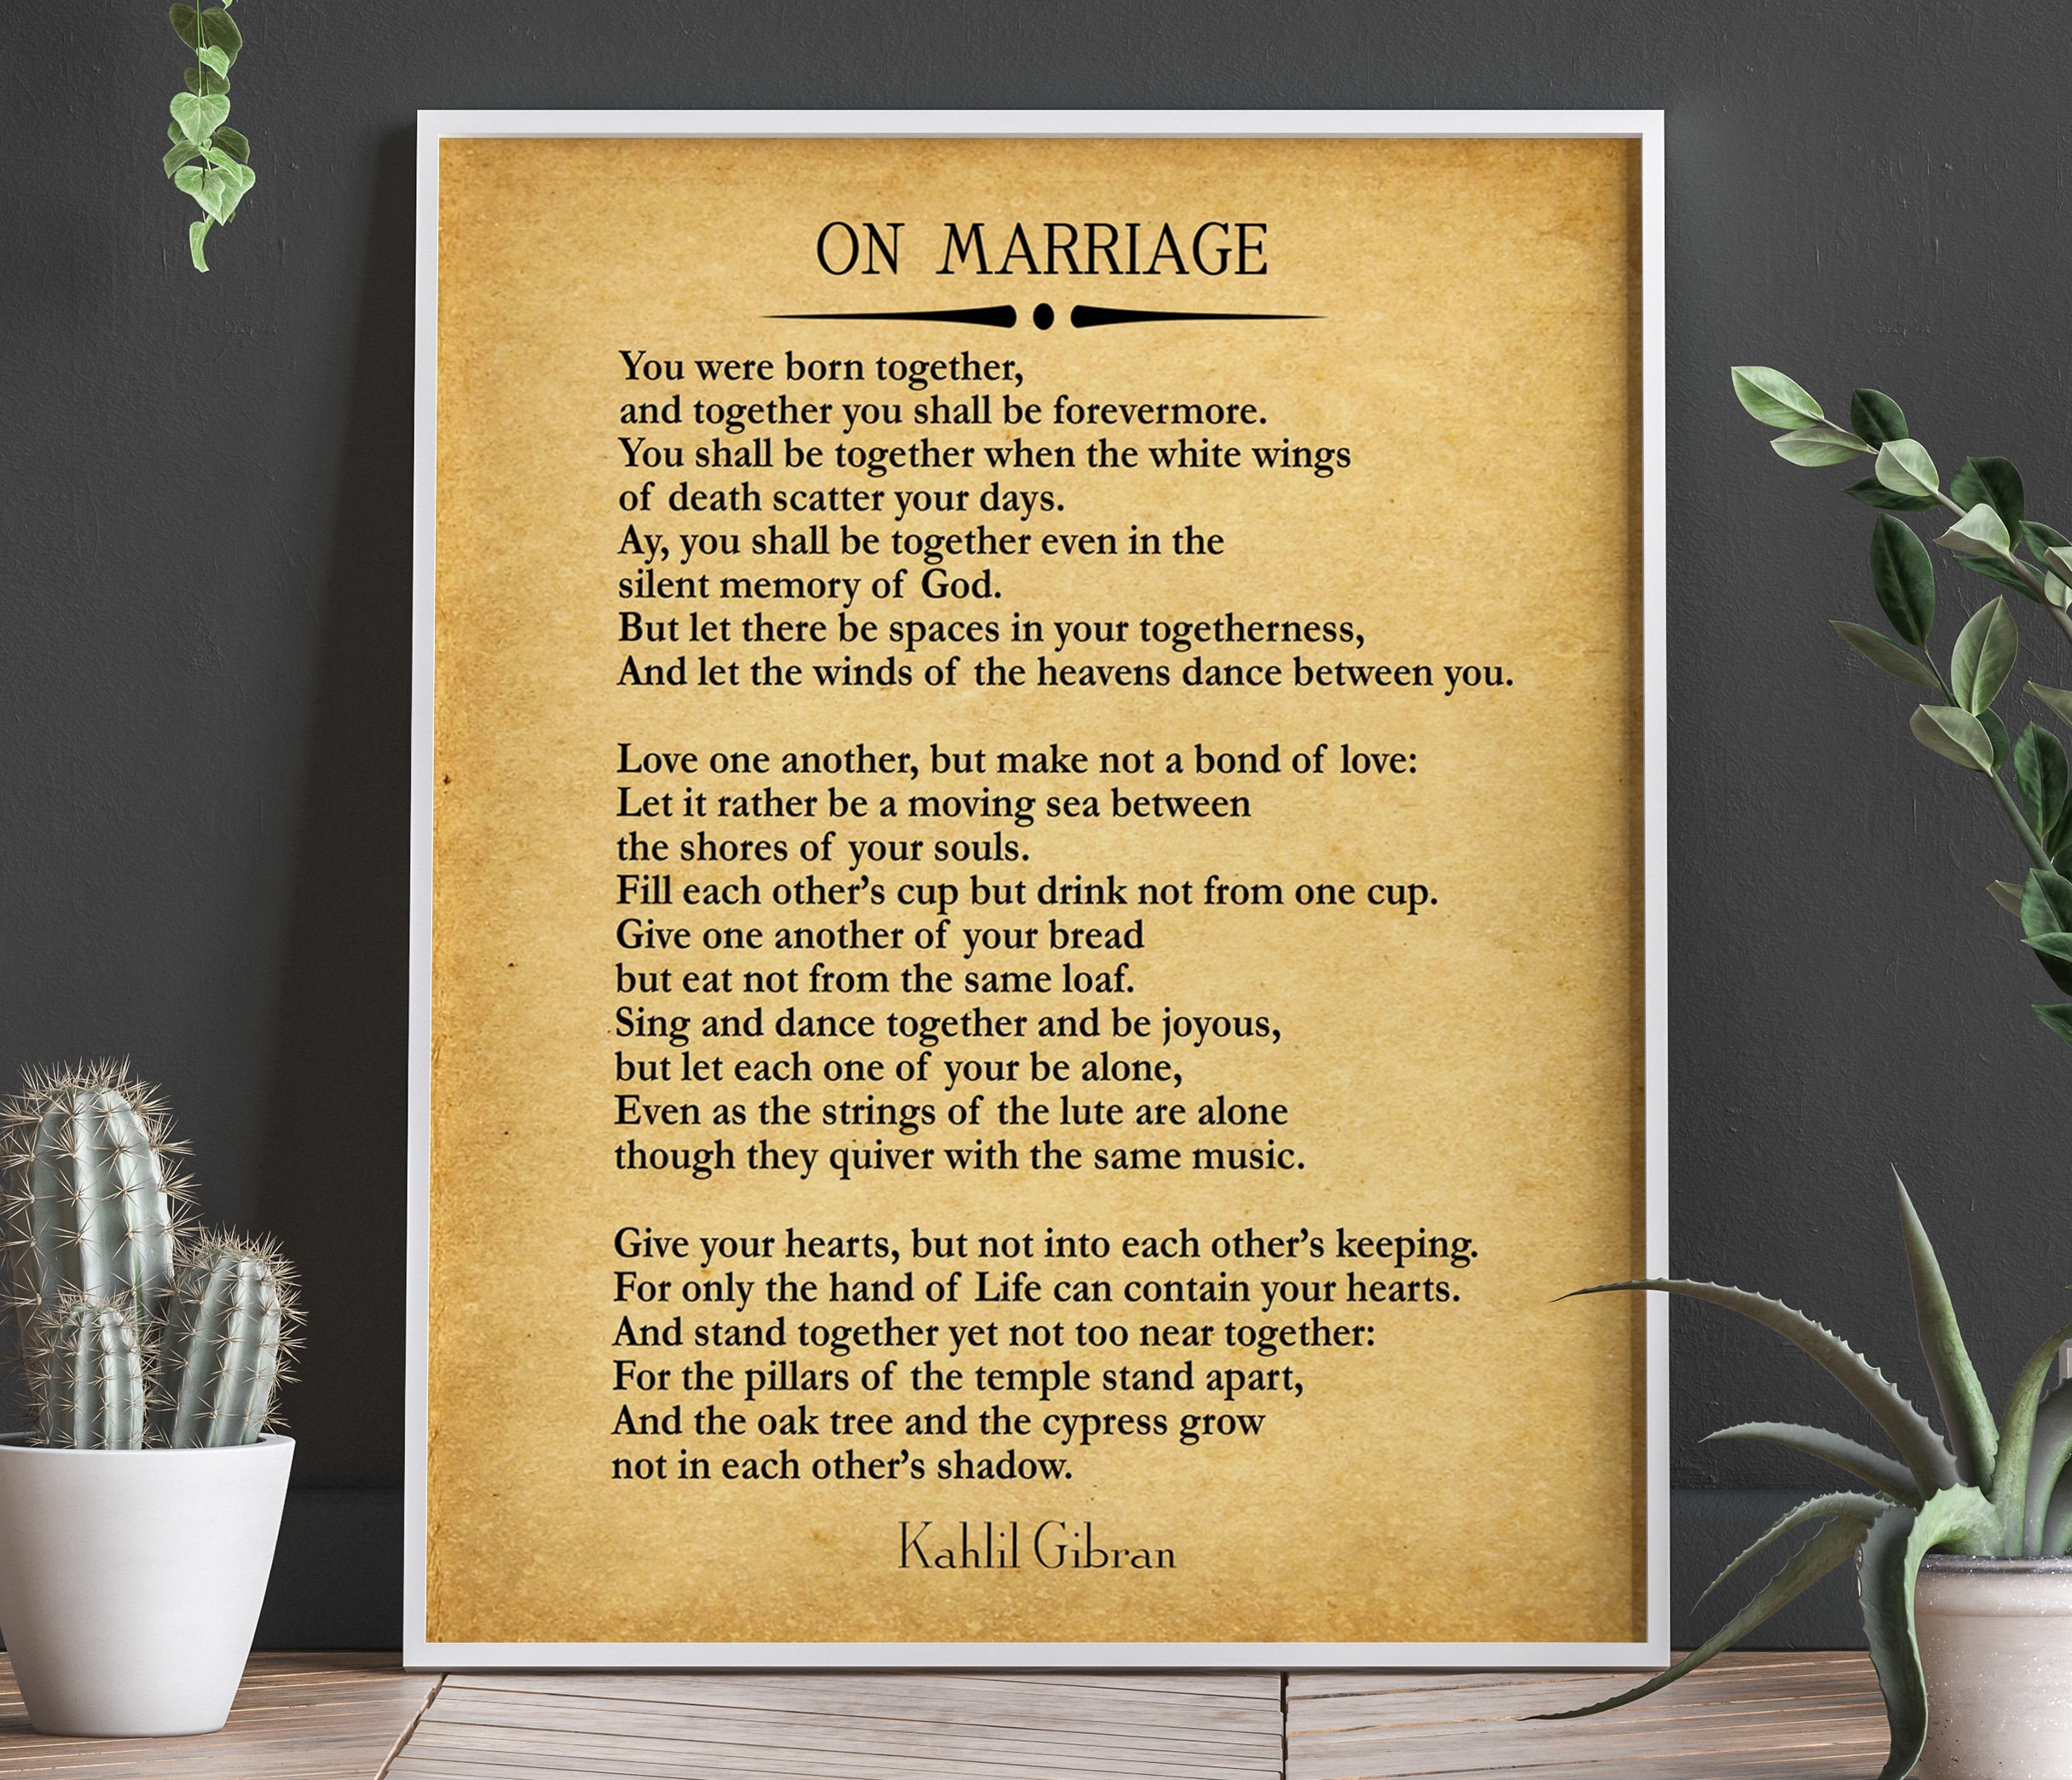 Motivational Typography Quotes Inspiring Words Wisdom Quotes On Marriage Poem by Kahlil Gibran Quote The Prophet Home Decor Wall Art